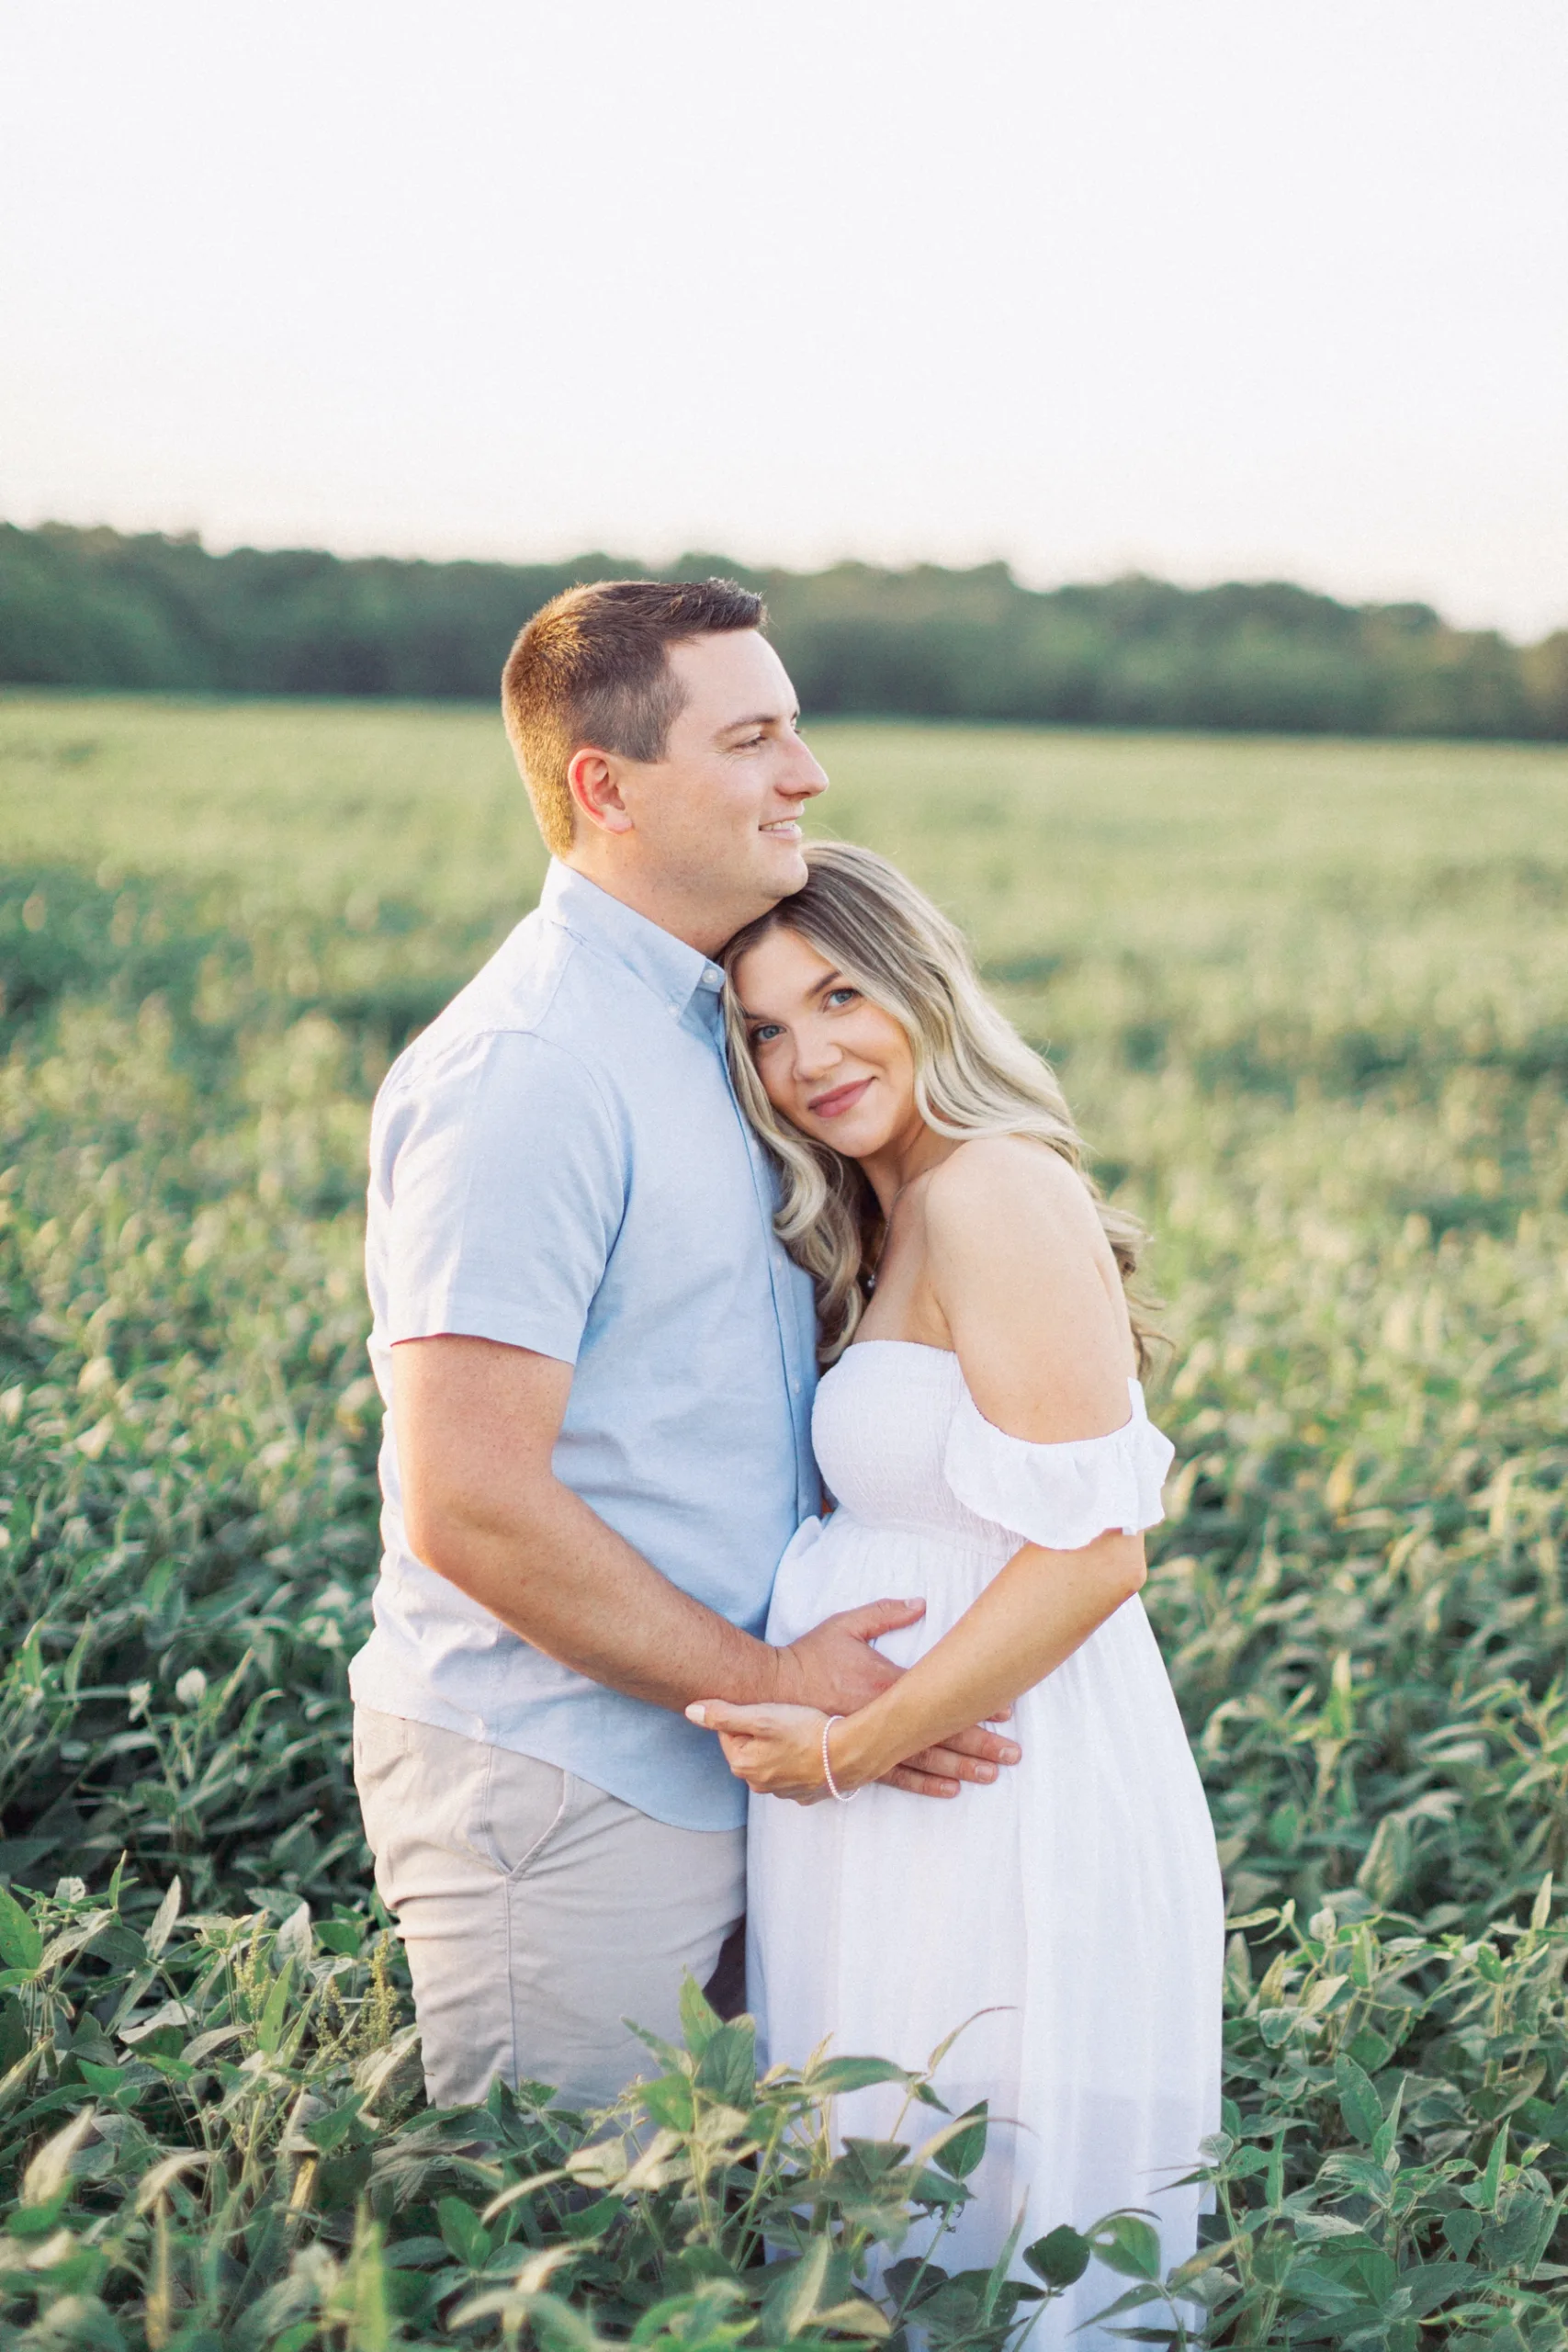 st. louis maternity photography